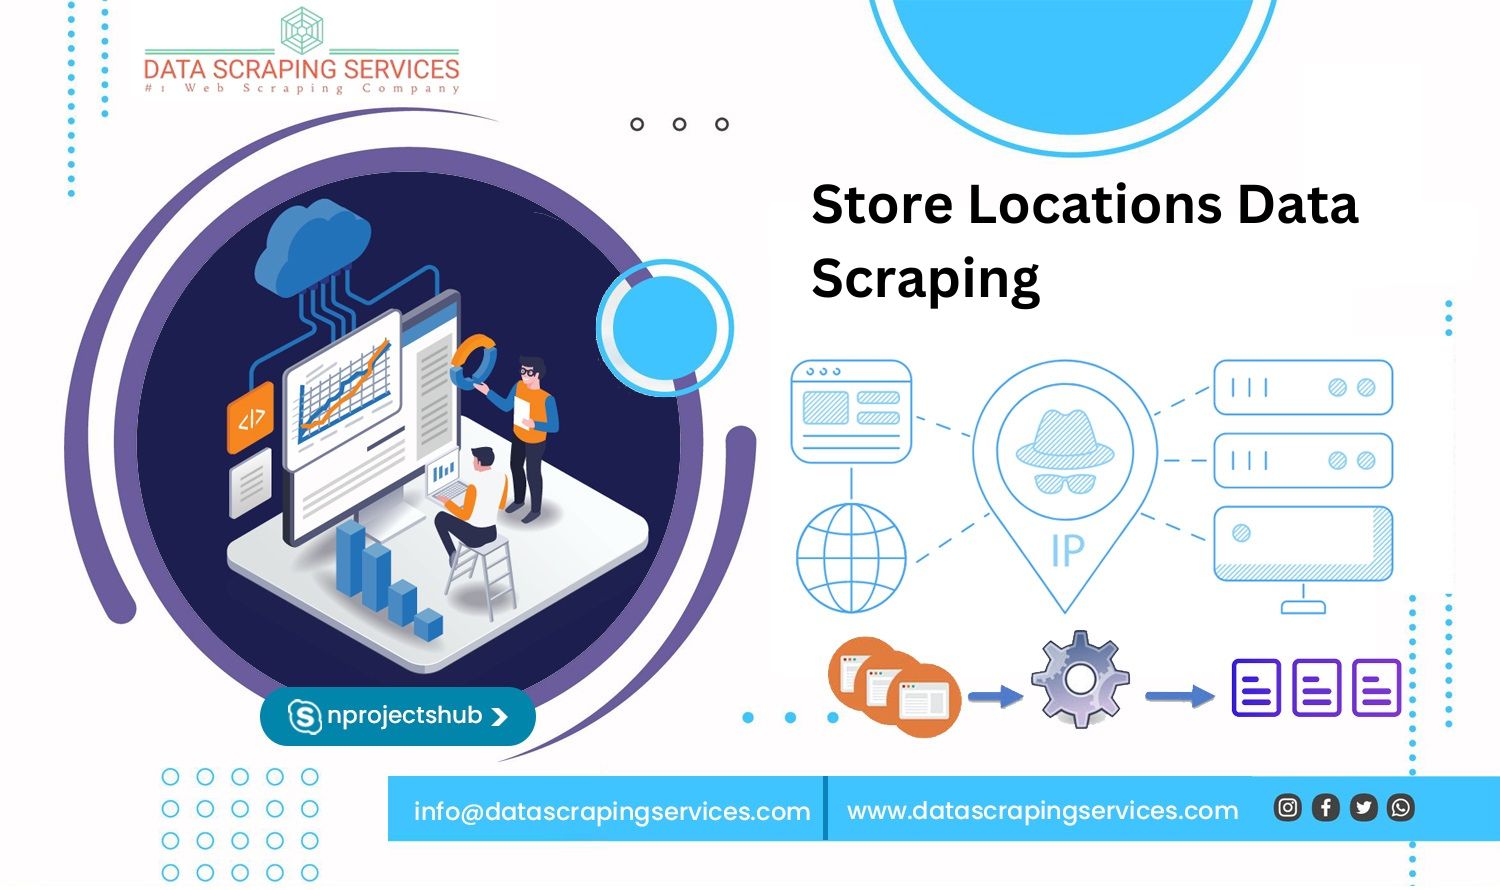 Store Locations Data Scraping